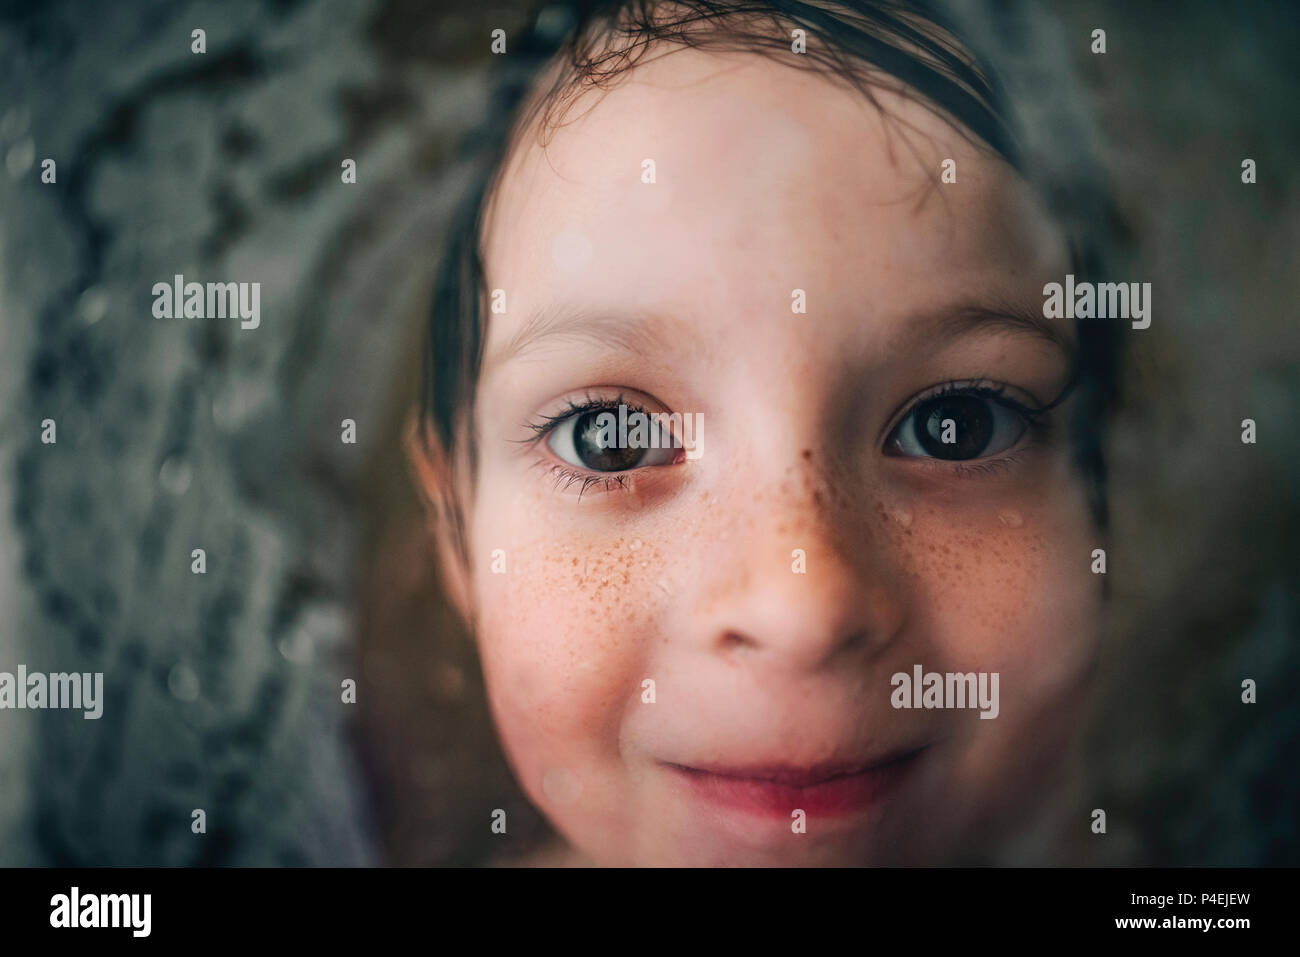 Portrait of a smiling girl looking through the wet shower glass Stock Photo